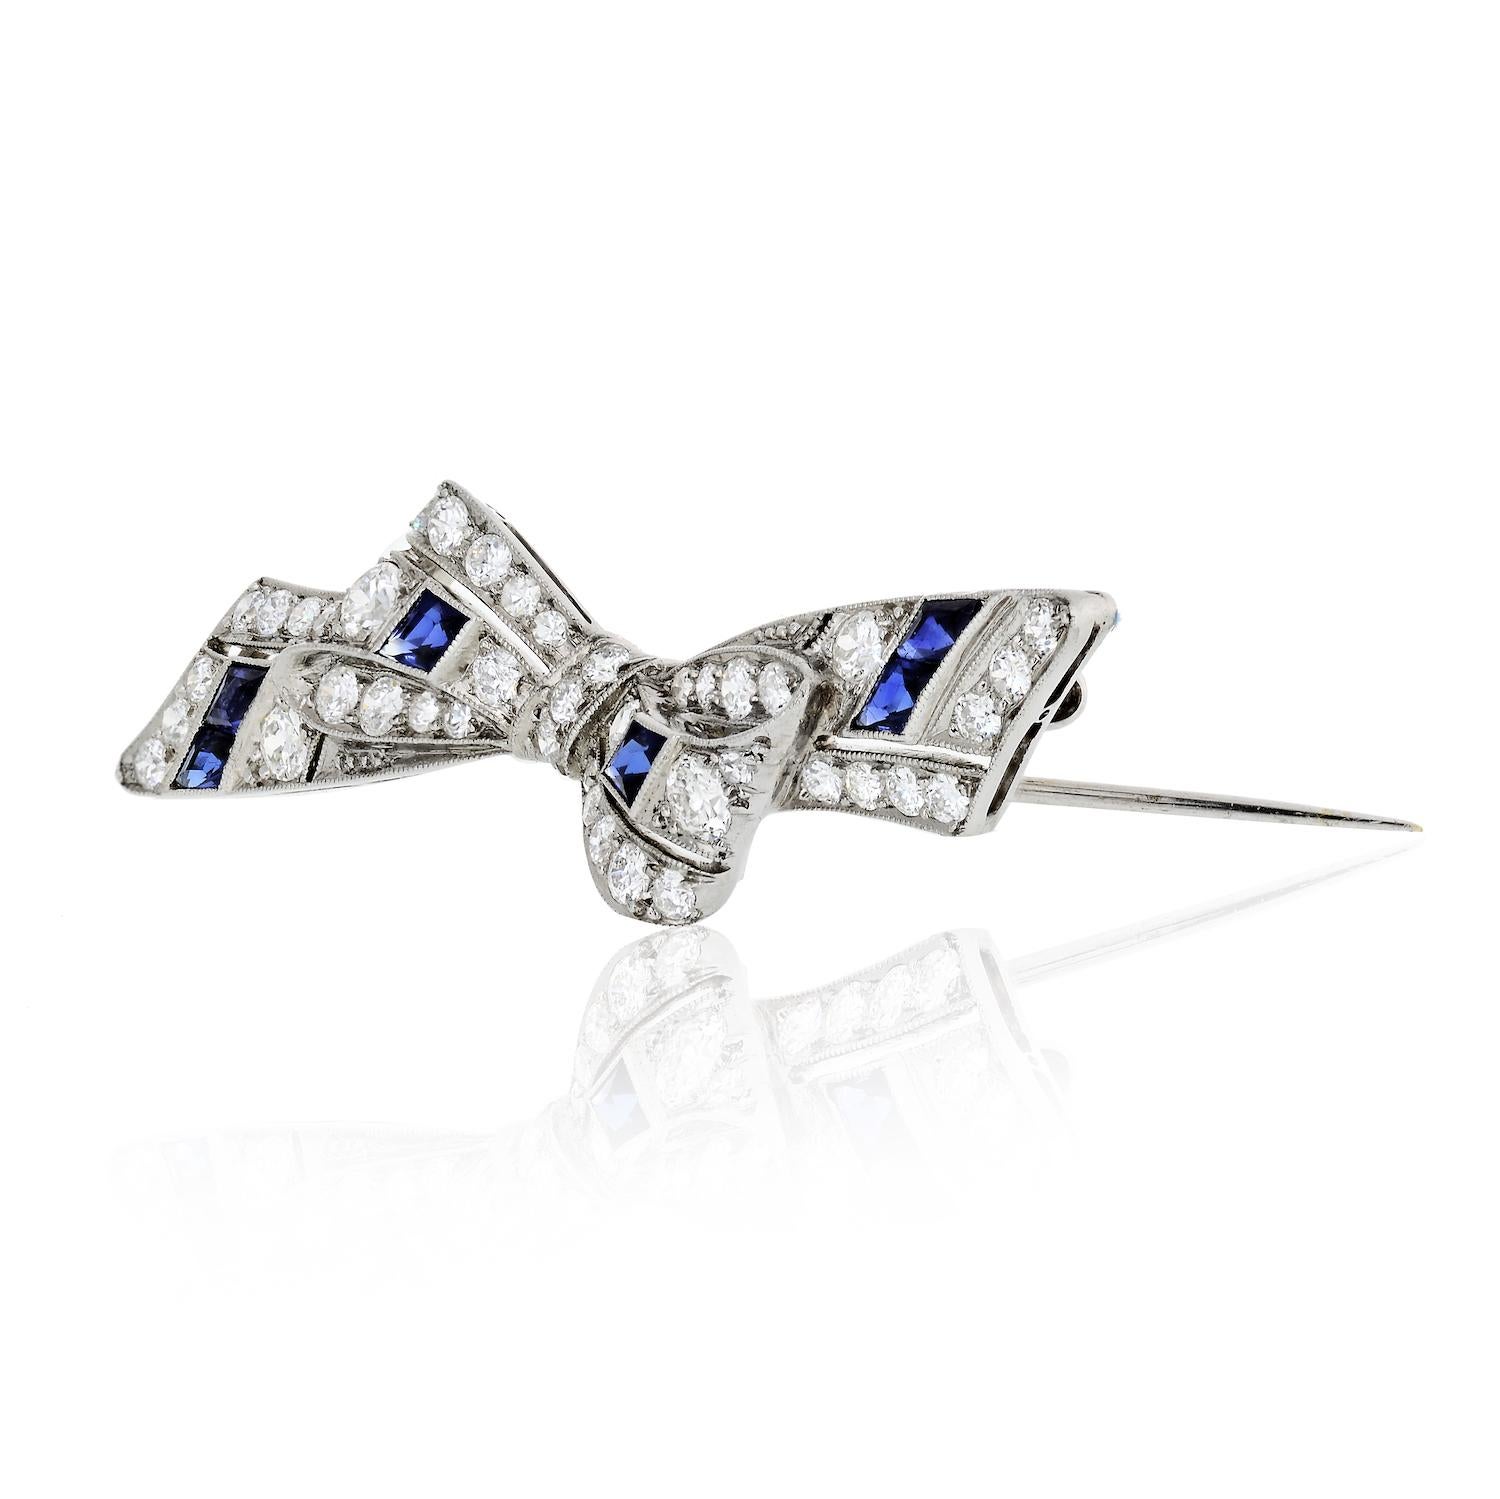 Vintage Tiffany & Co Platinum Sapphire Diamond Bow Pin

The realistic bow of pierced design, set throughout with single and full-cut diamonds, and french cut sapphires in millegrain detailed platinum.

Measurements:
Length: 5cm
Width: 1cm
Gram